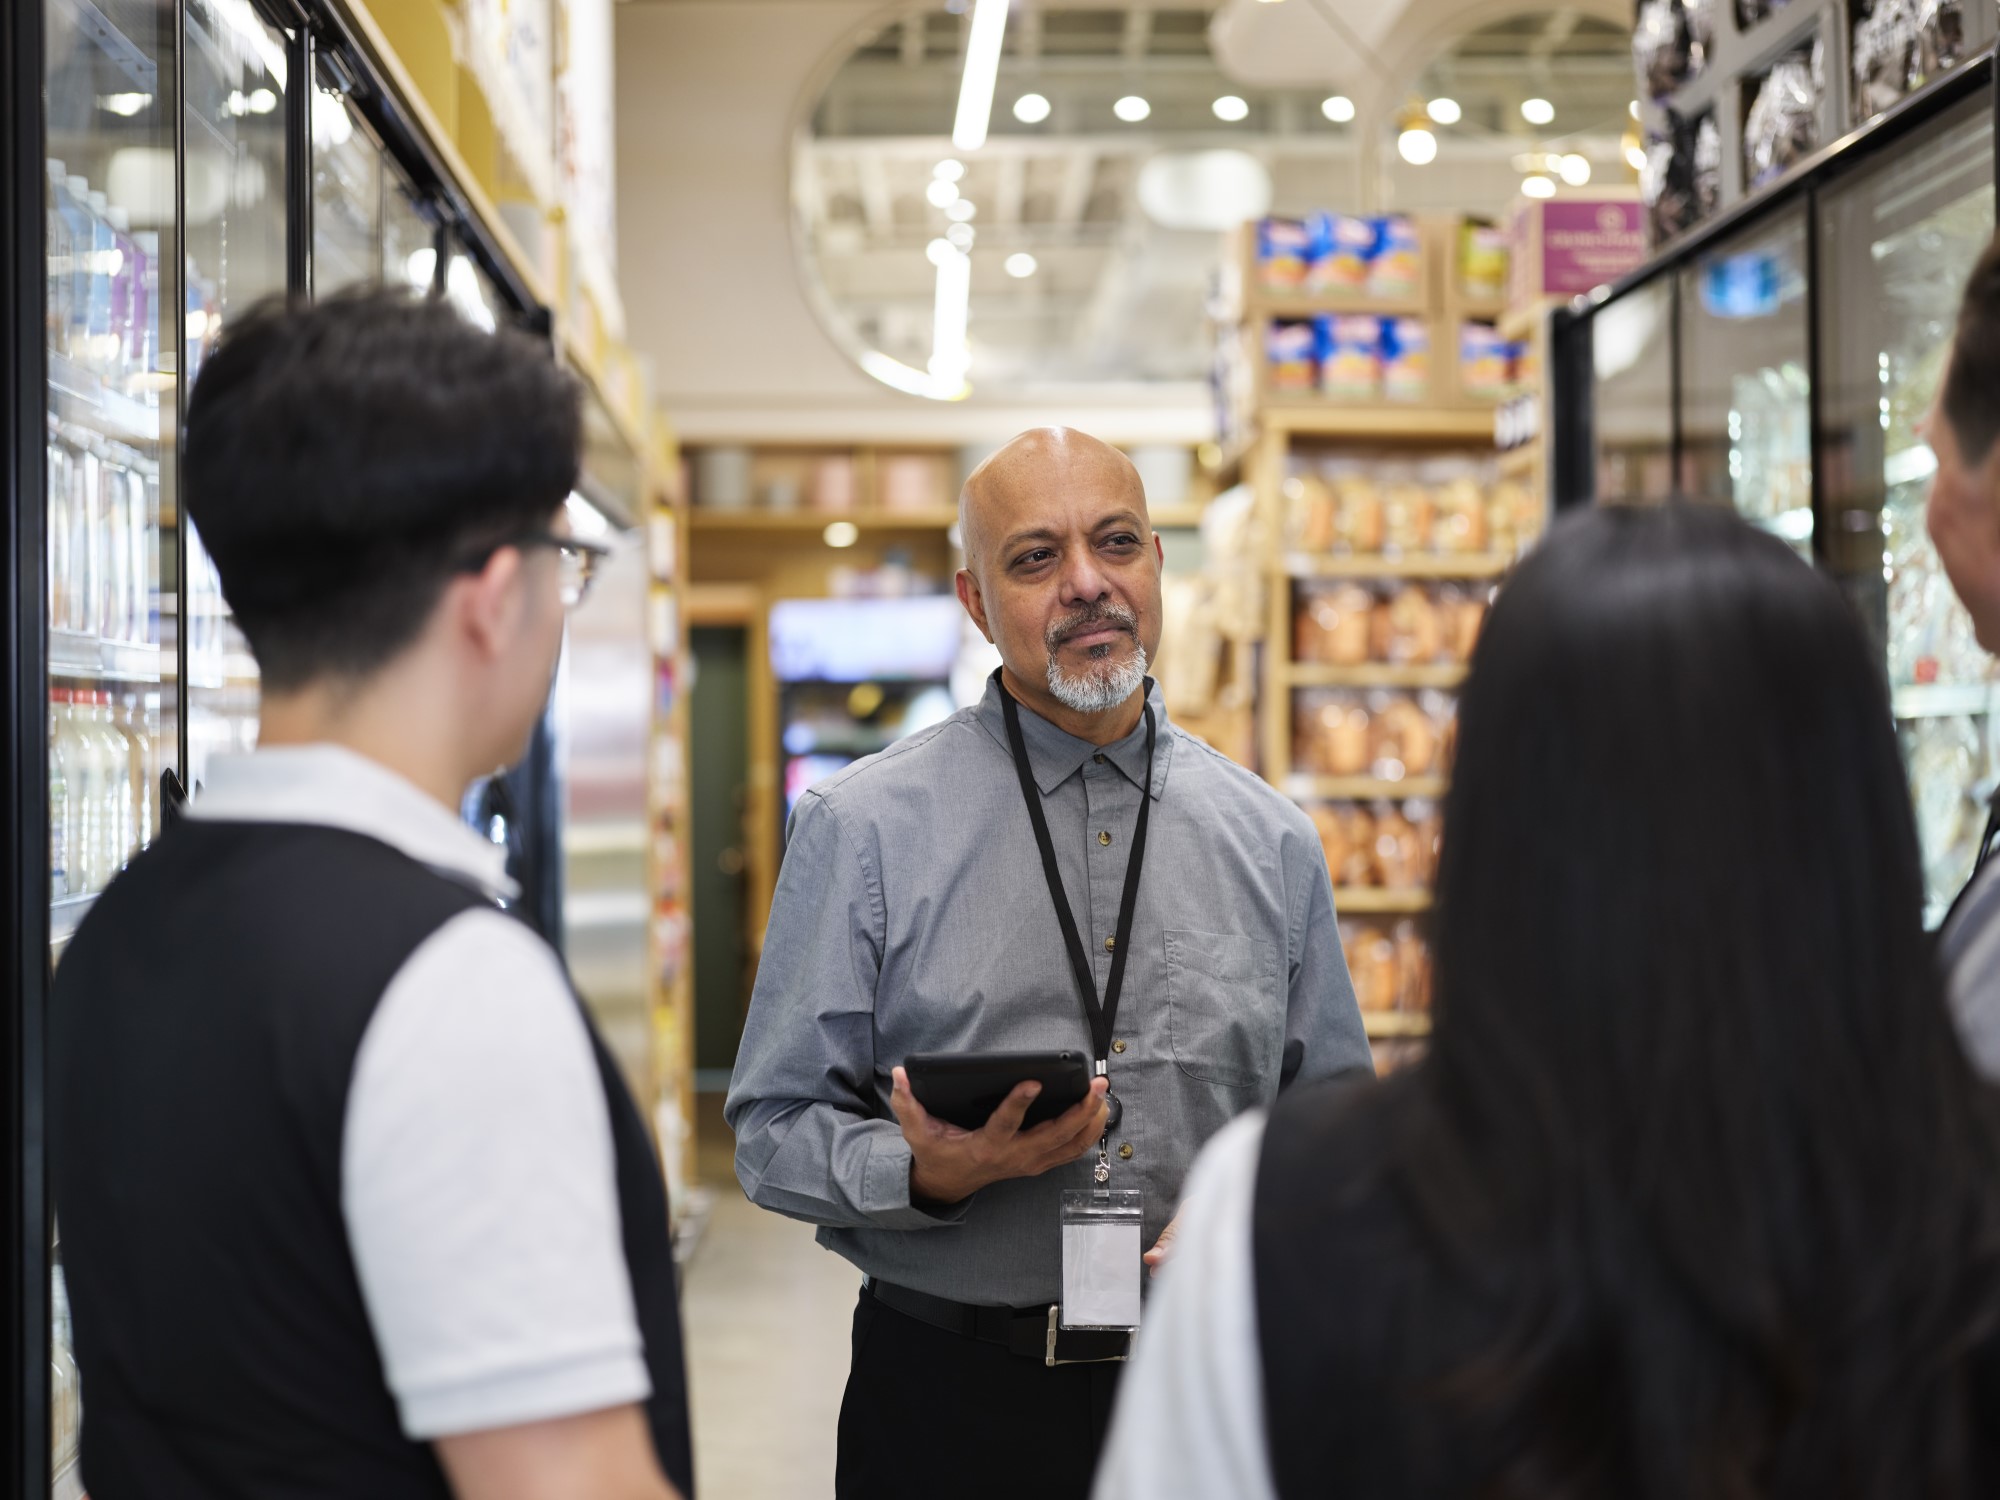 A grocery manager speaking to a group of associates